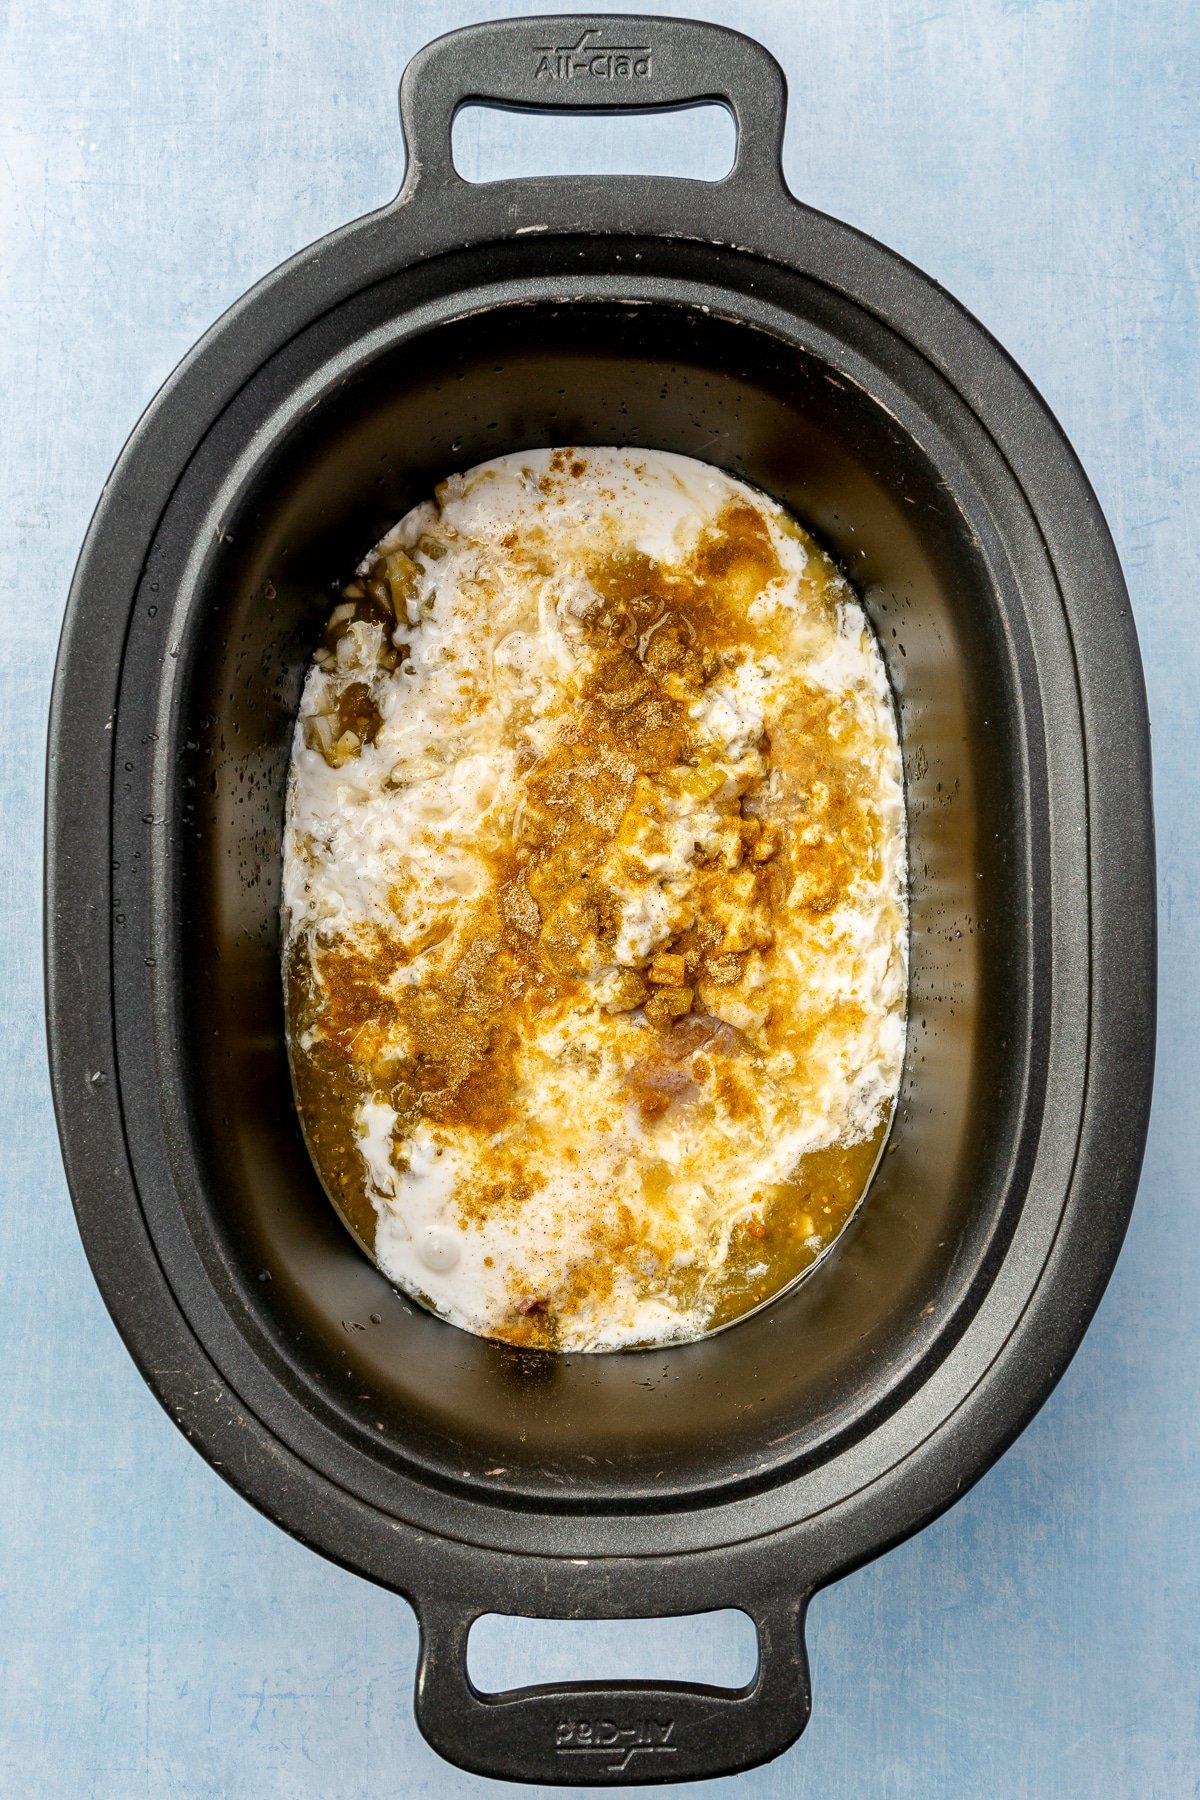 A variety of ingredients, including coconut milk and green Chile sauce, have been put into a black, cast iron pot.